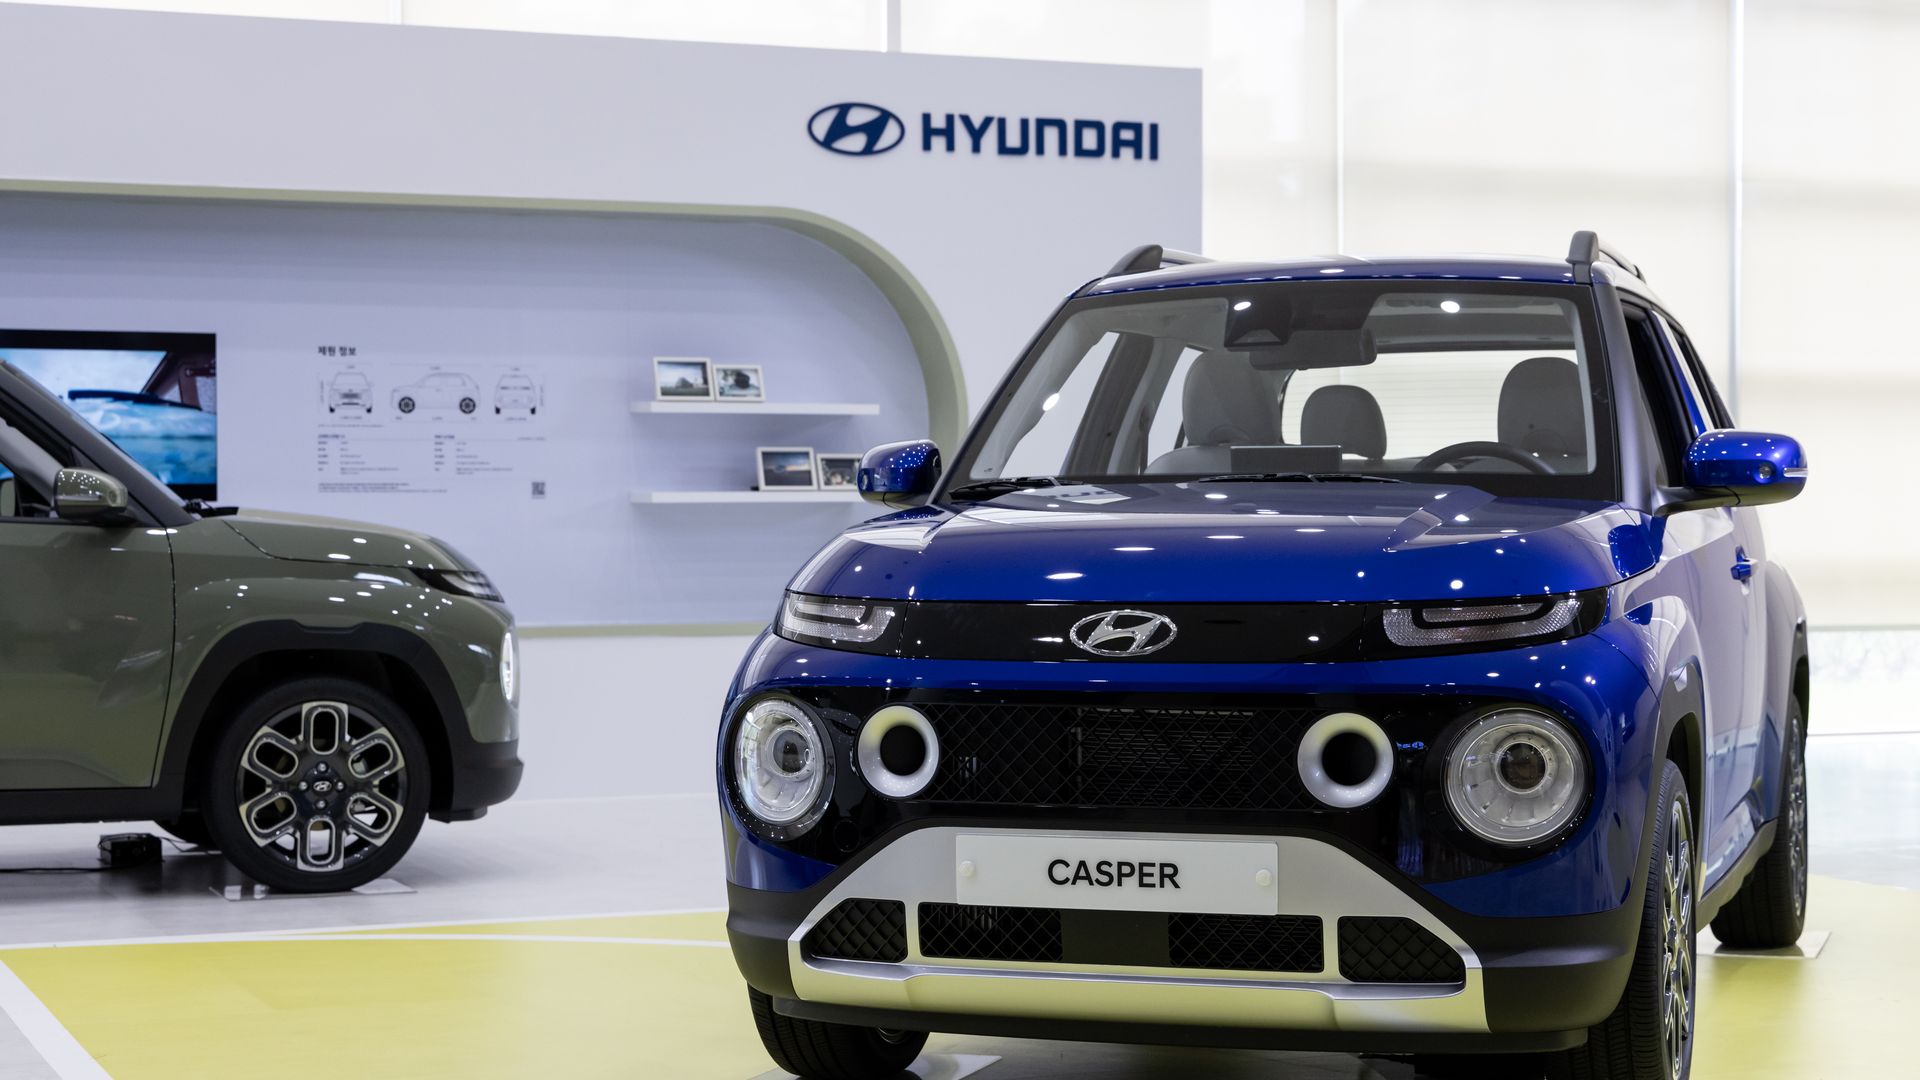 Photo of a blue Hyundai car on display on the right and a dark green Hyundai car on the left